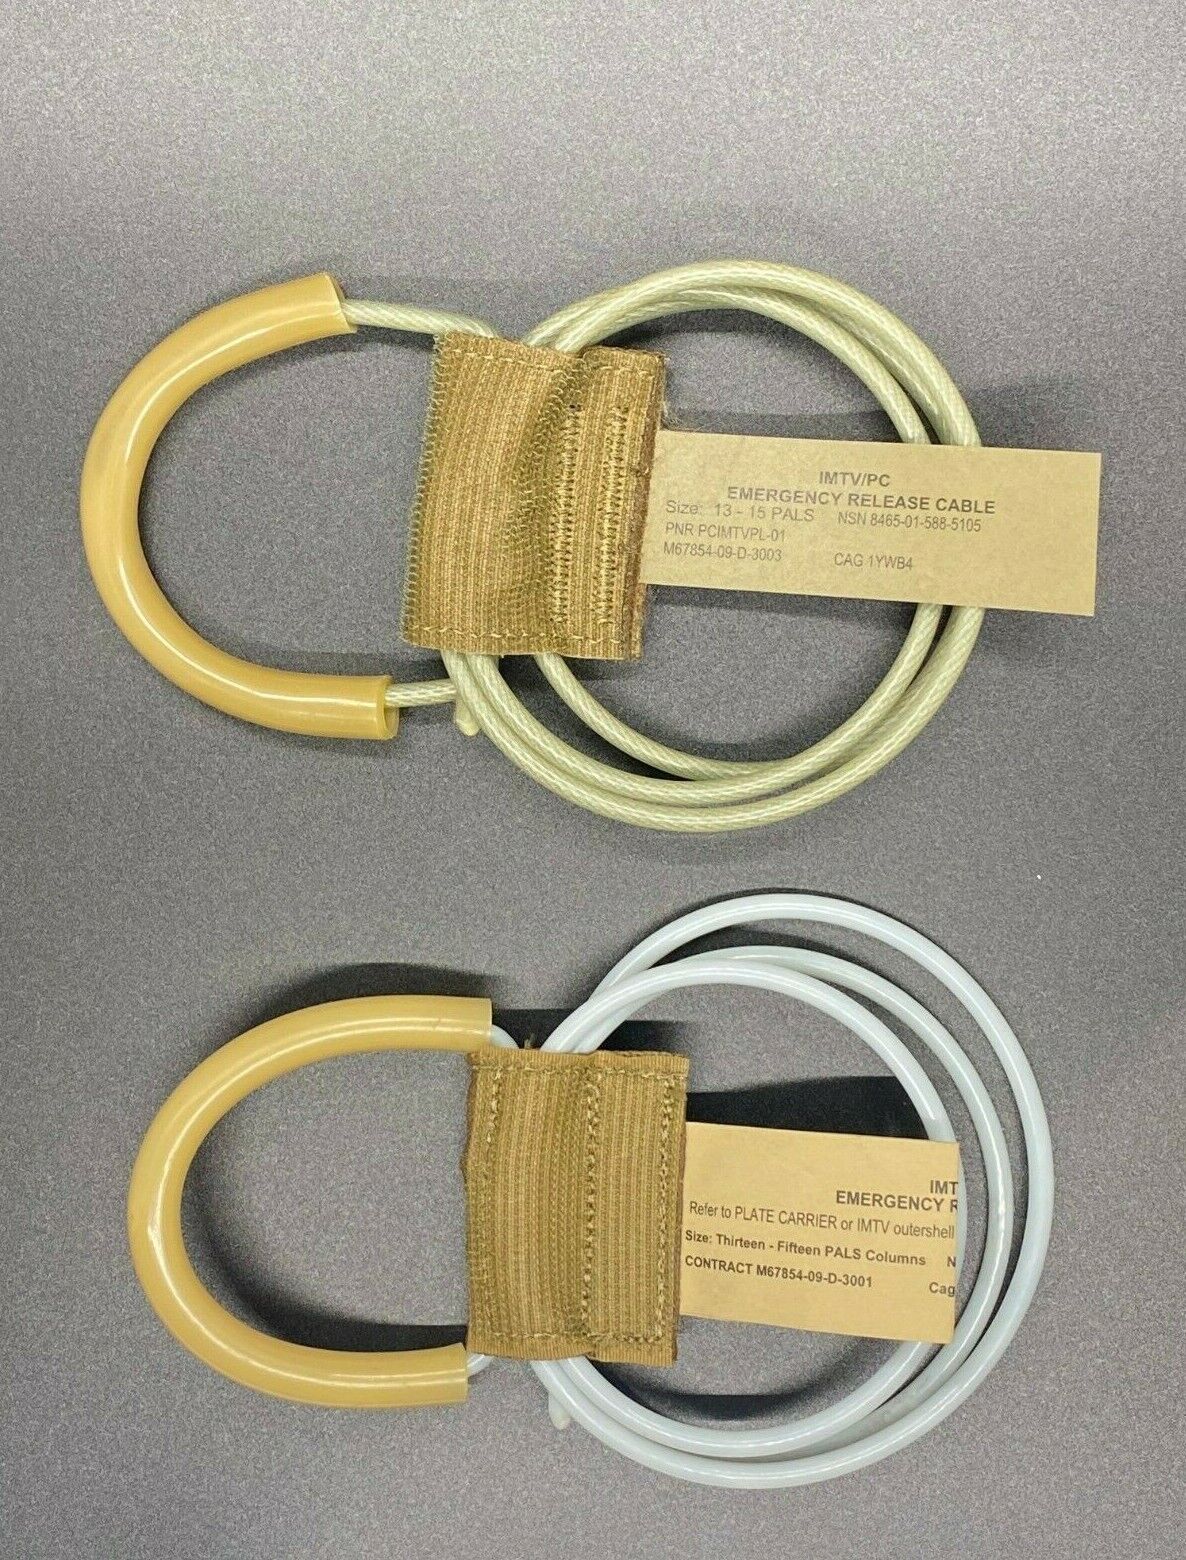 USMC Issue Plate Carrier IMTV/PC EMERGENCY Release Cable Coyote Brown